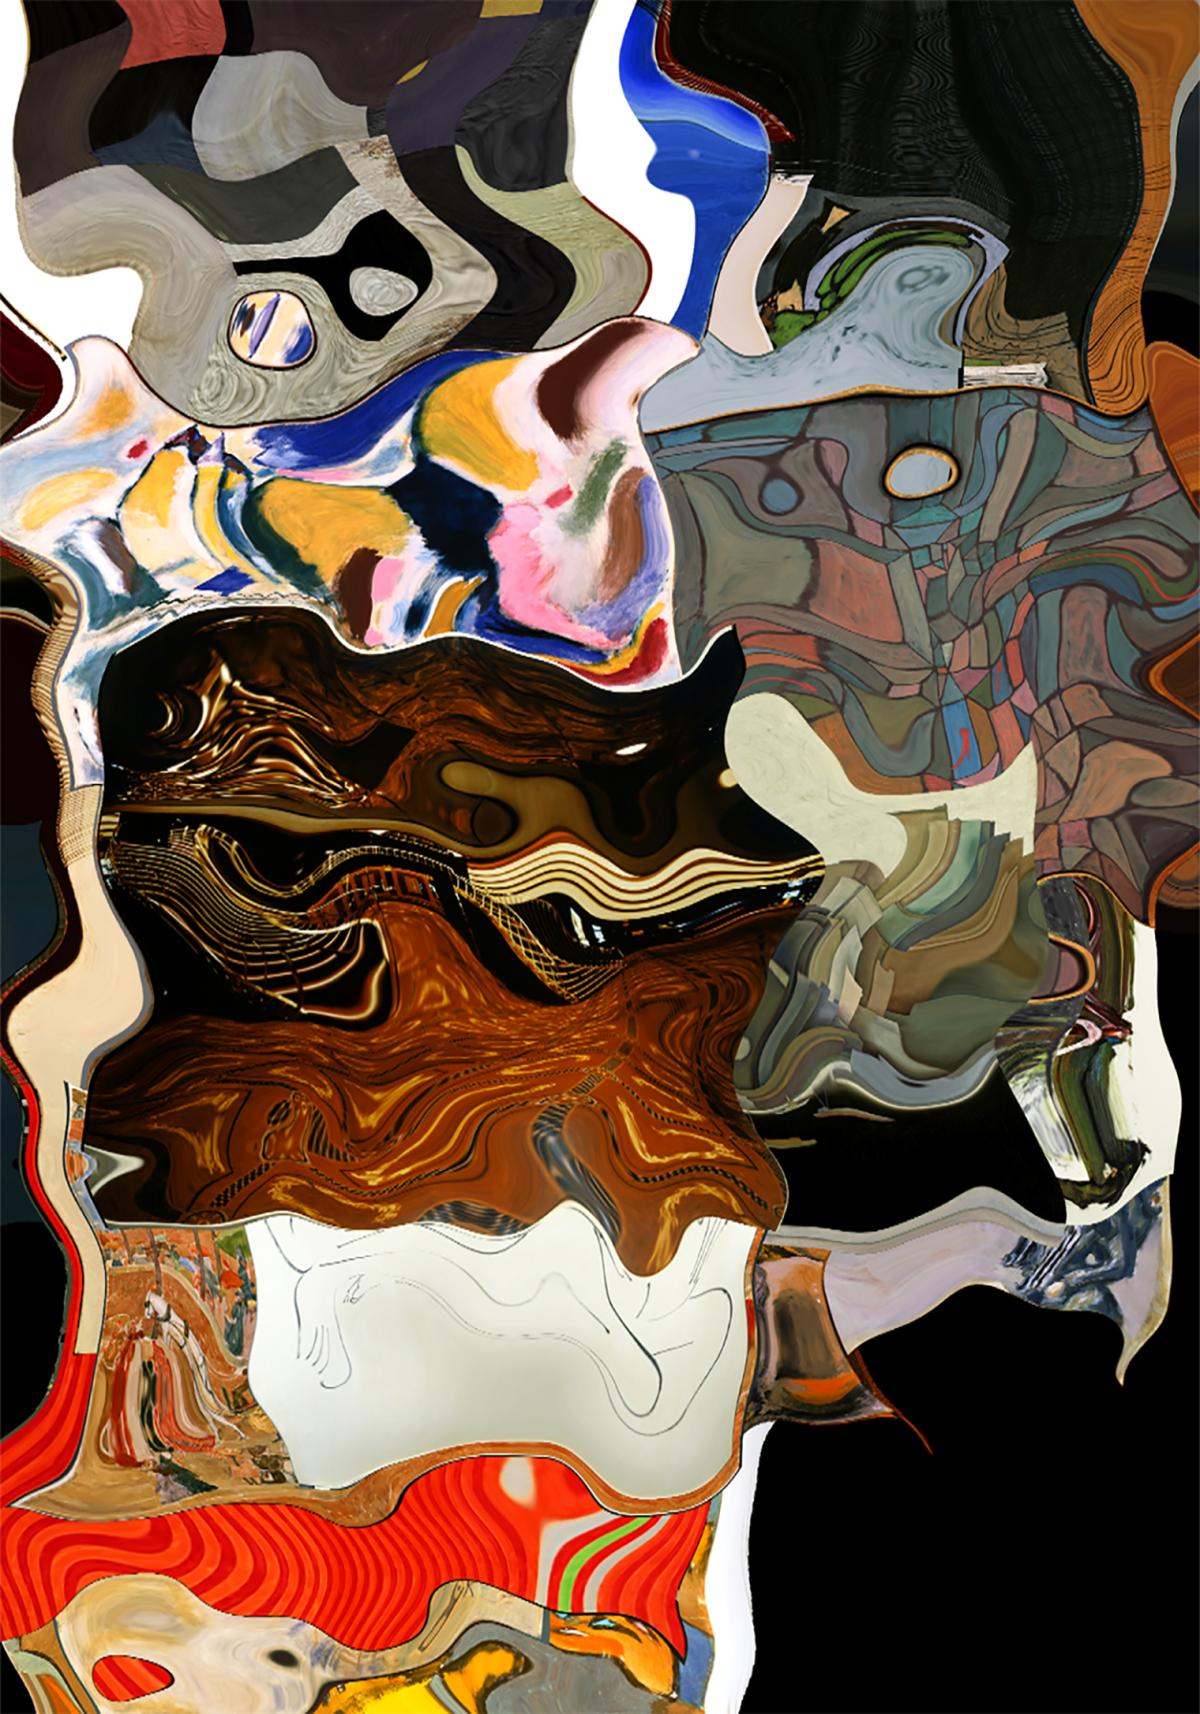 Abstract image of melting and mixing colors